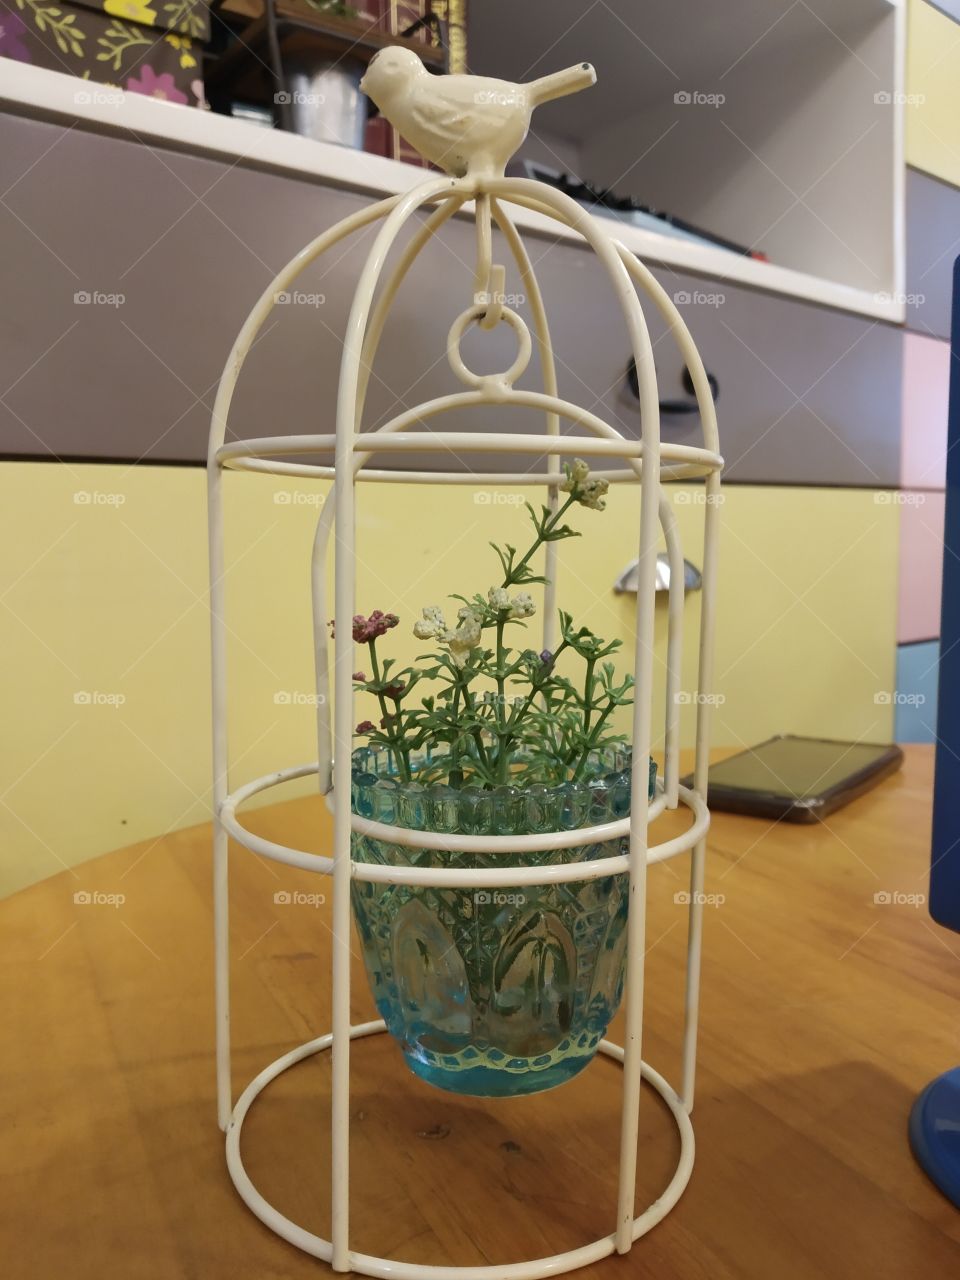 Plants in a cage